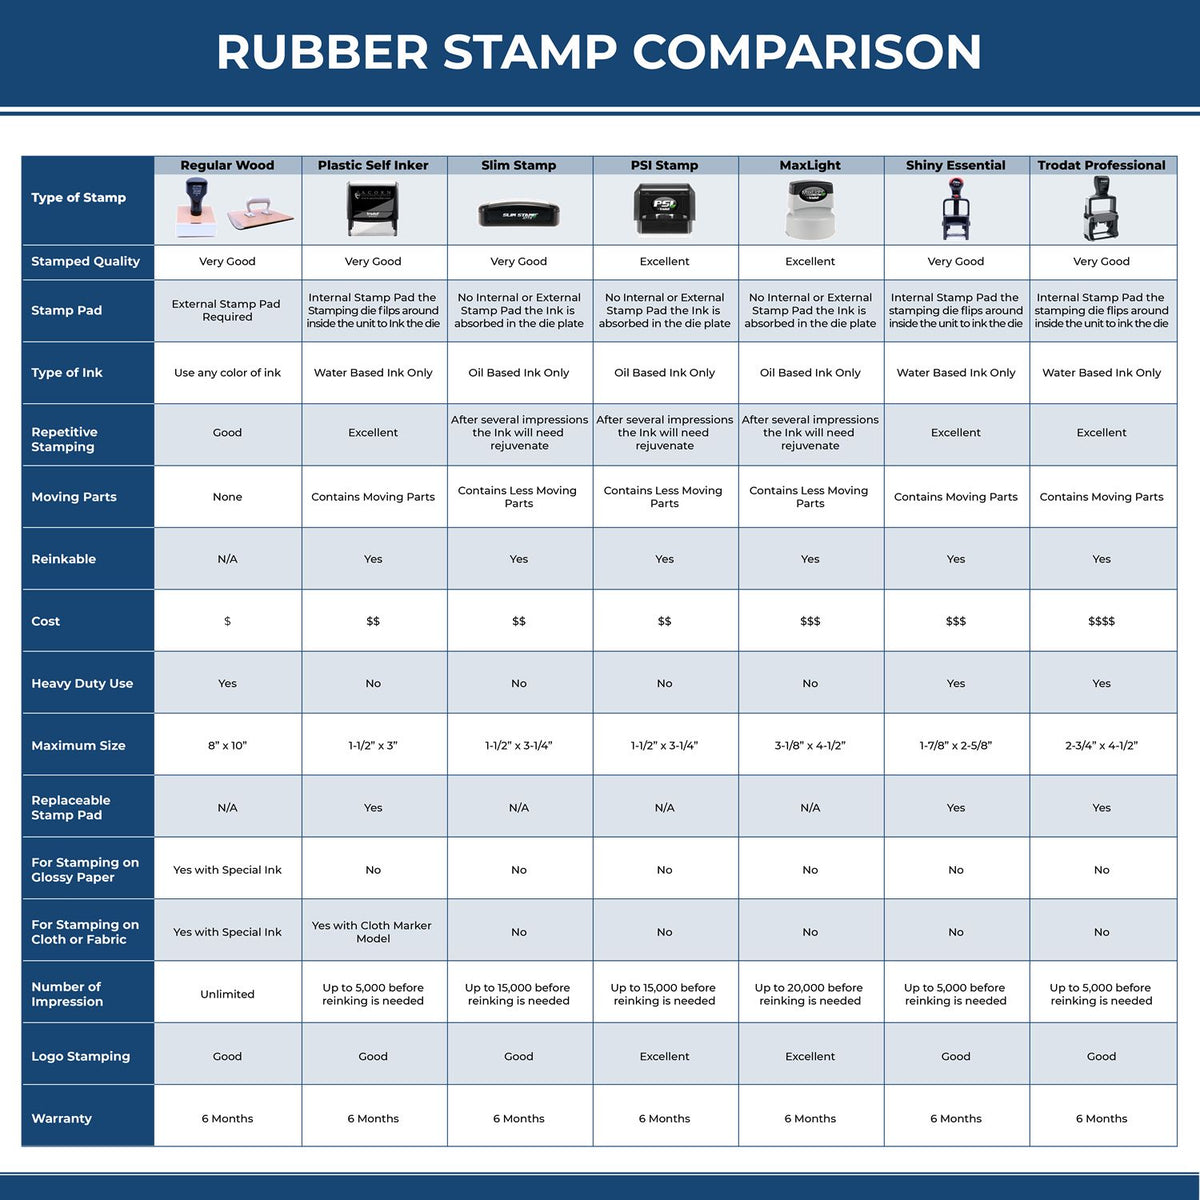 A comparison chart for the different types of mount models available for the Premium MaxLight Pre-Inked Wyoming Engineering Stamp.